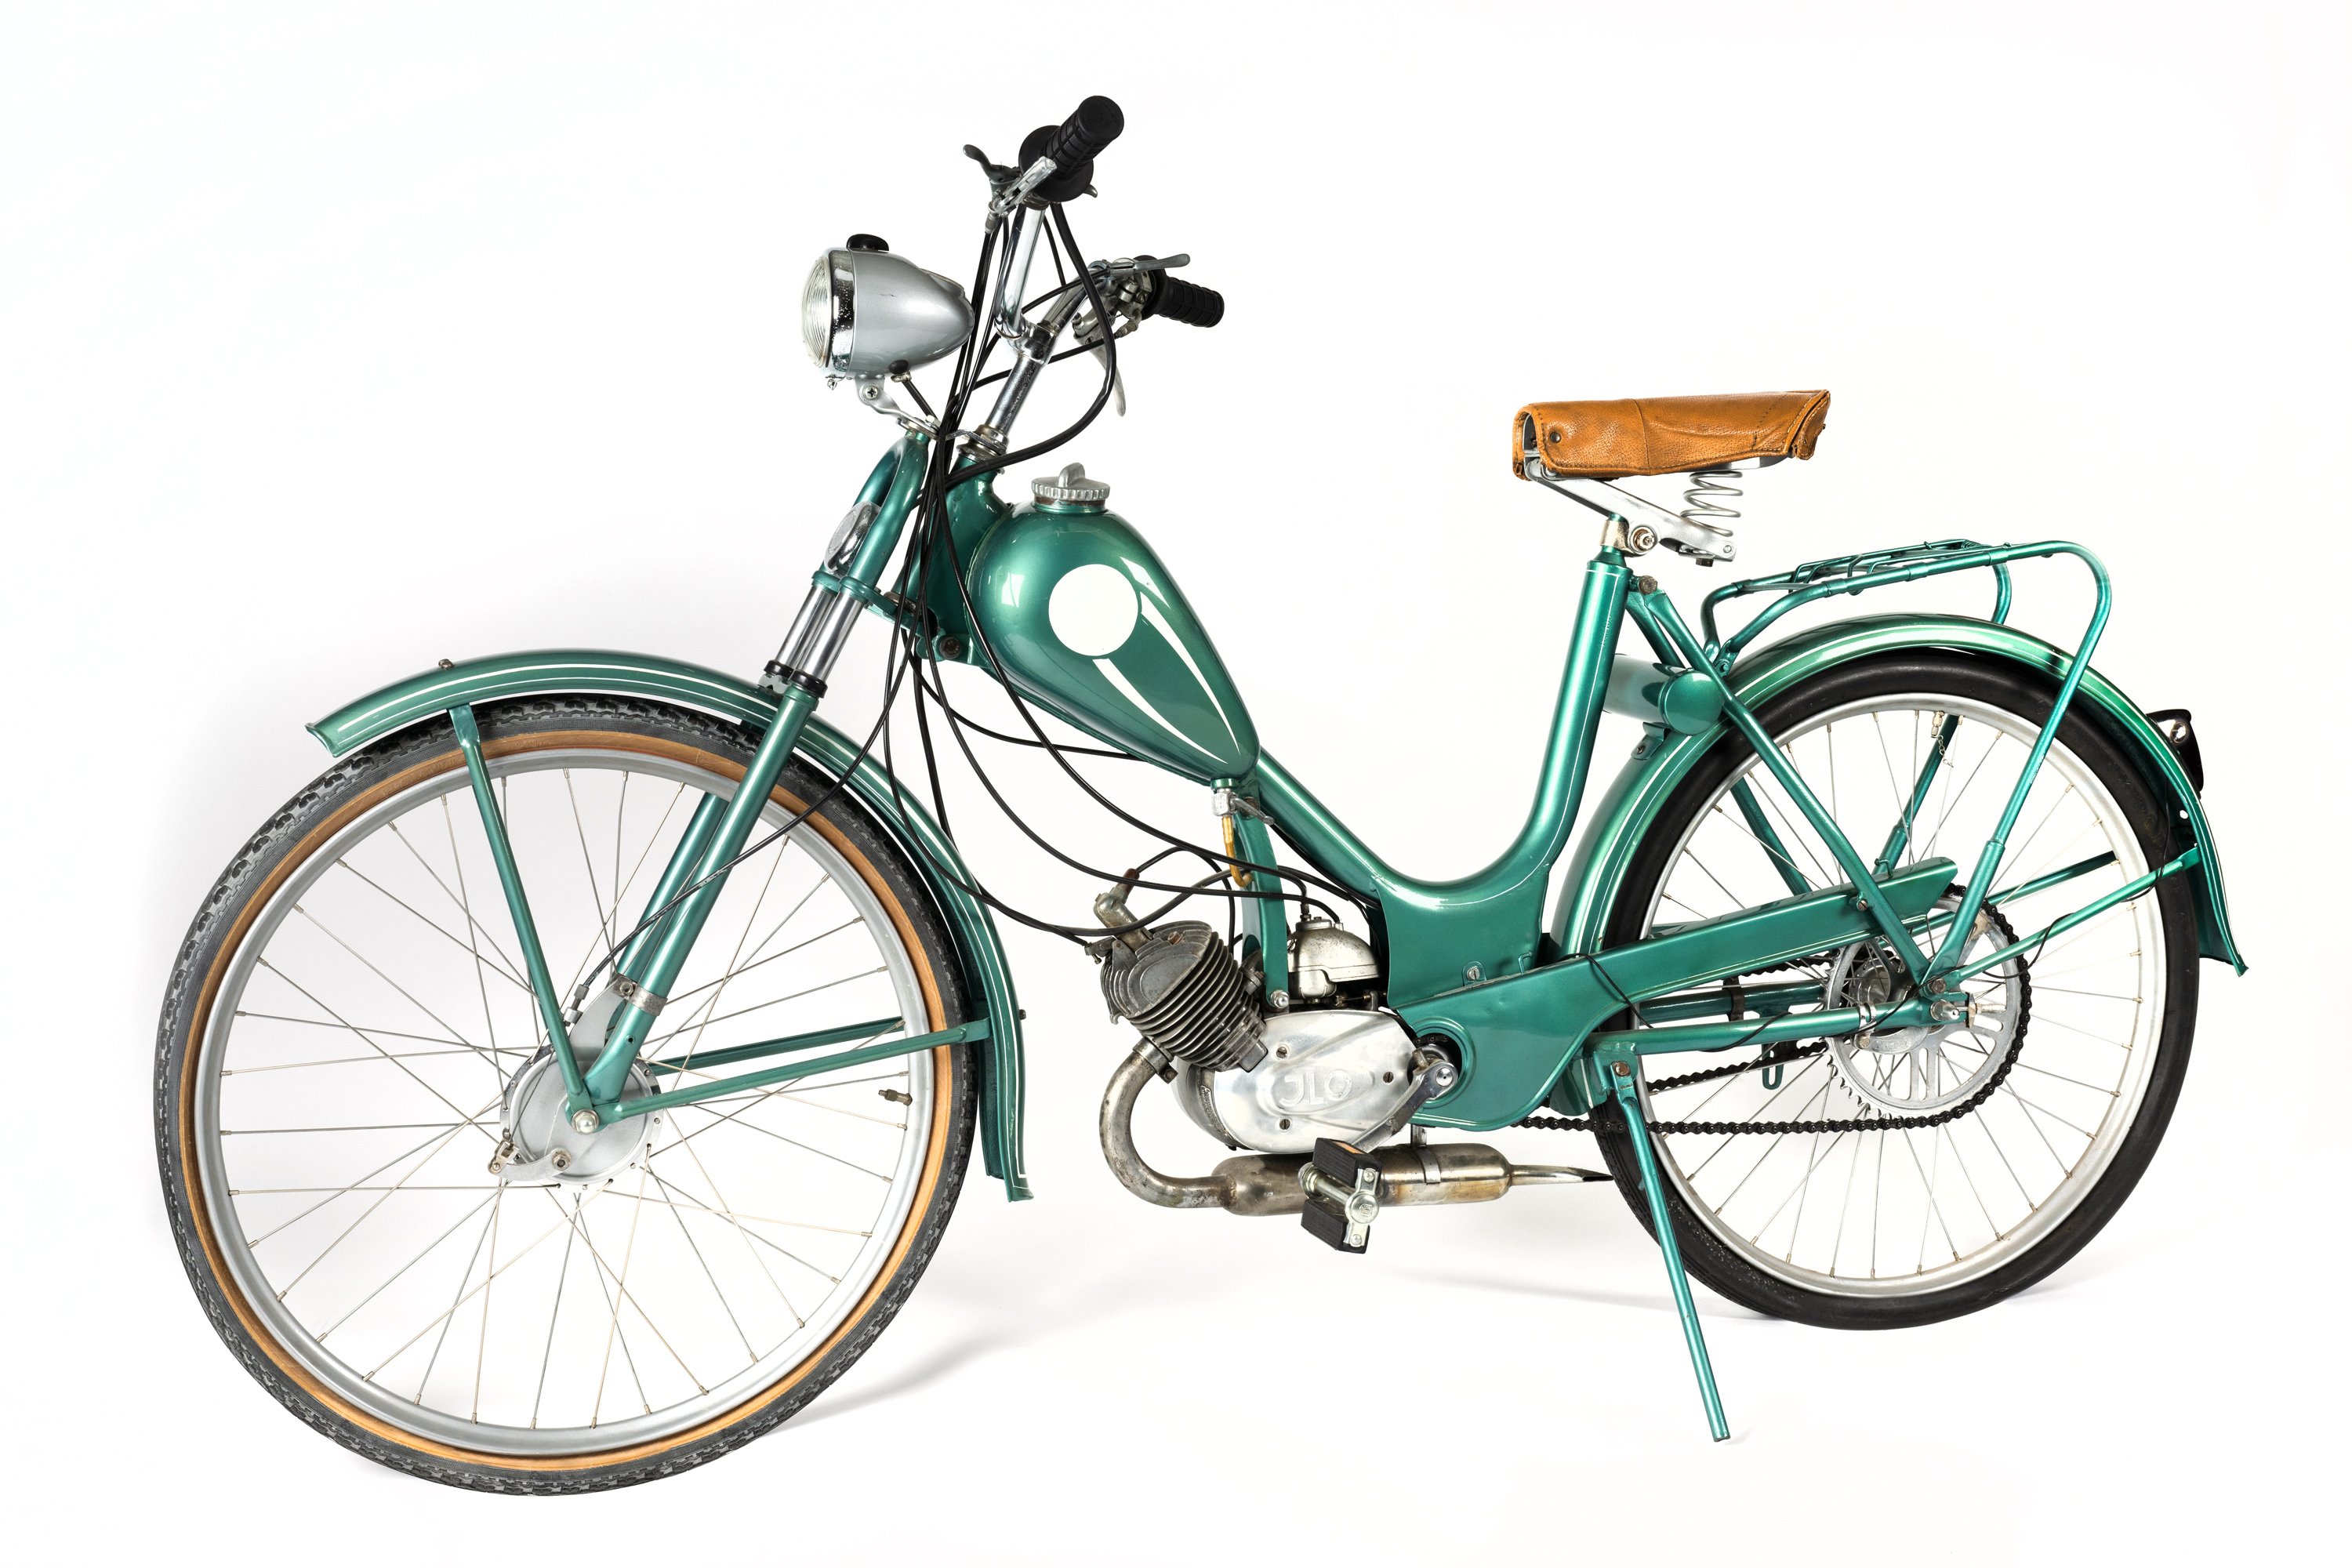 Moped: Sitta-Credette I mit ILO-Motor (Stadtmuseum Kassel CC BY-NC-SA)